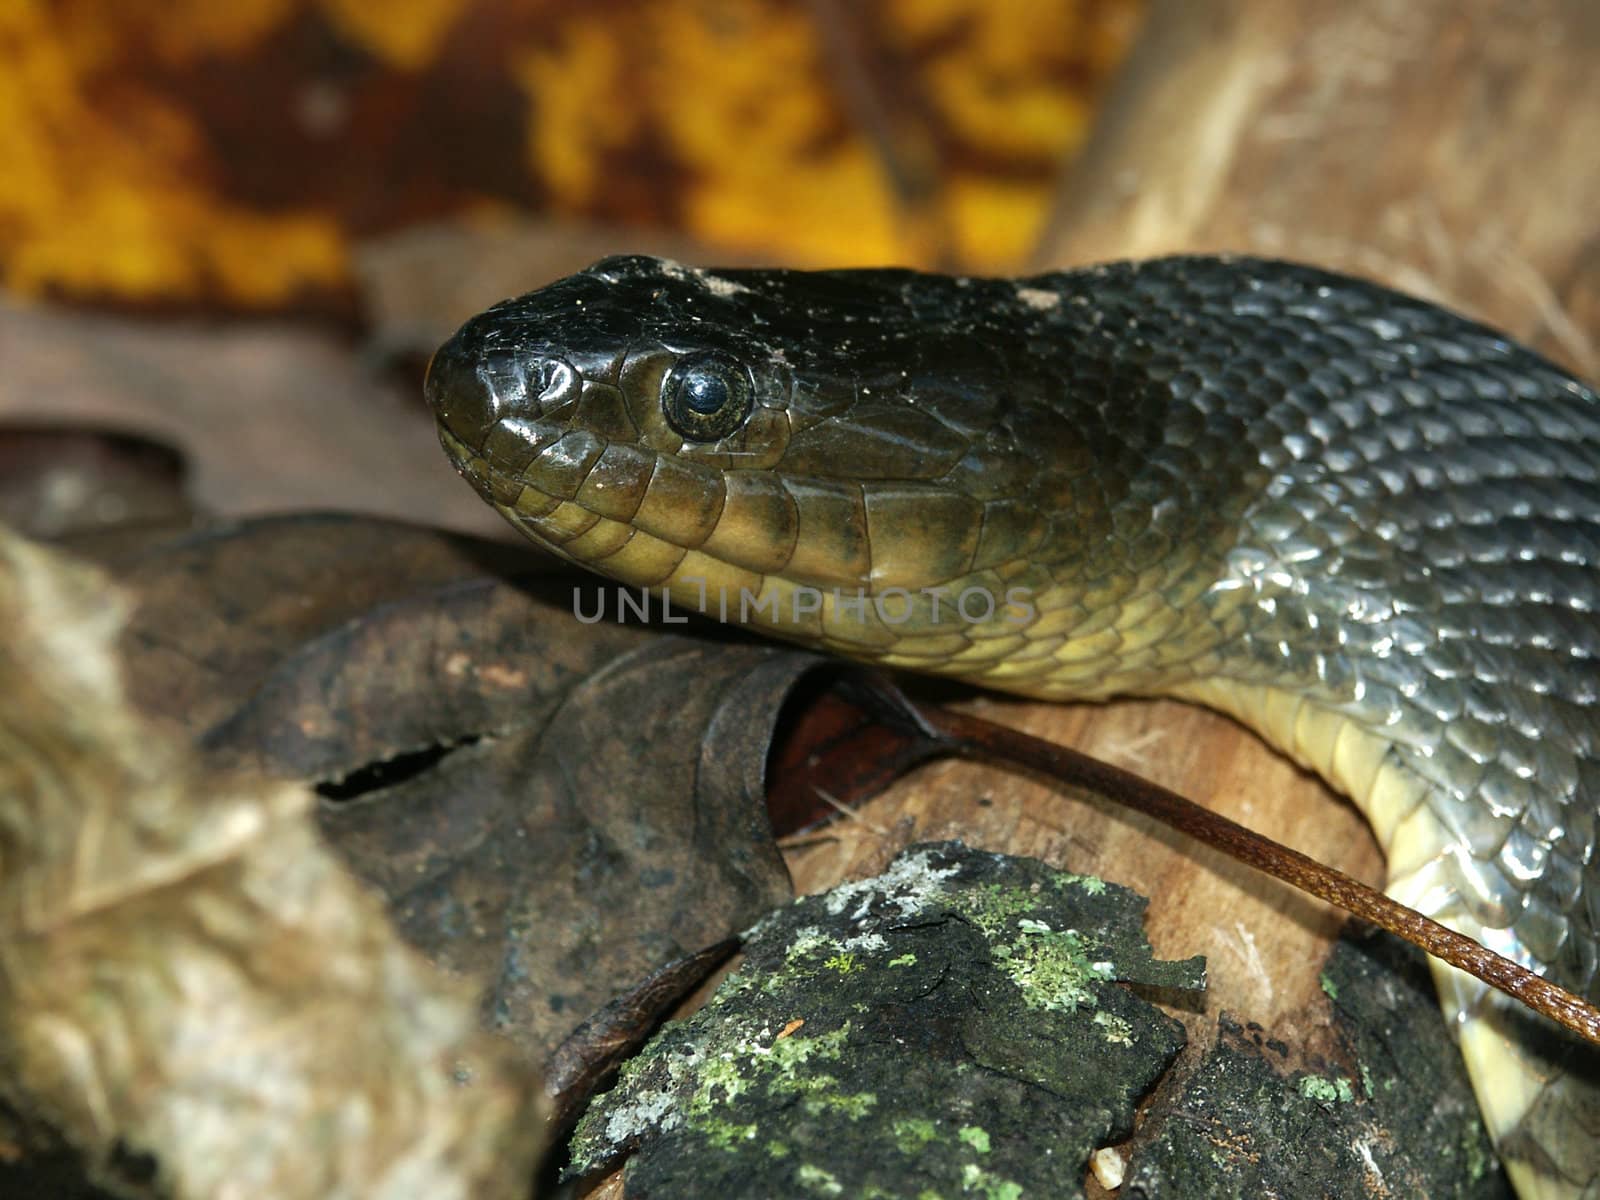 Mississippi Green Watersnake (Nerodia cyclopion) by Wirepec